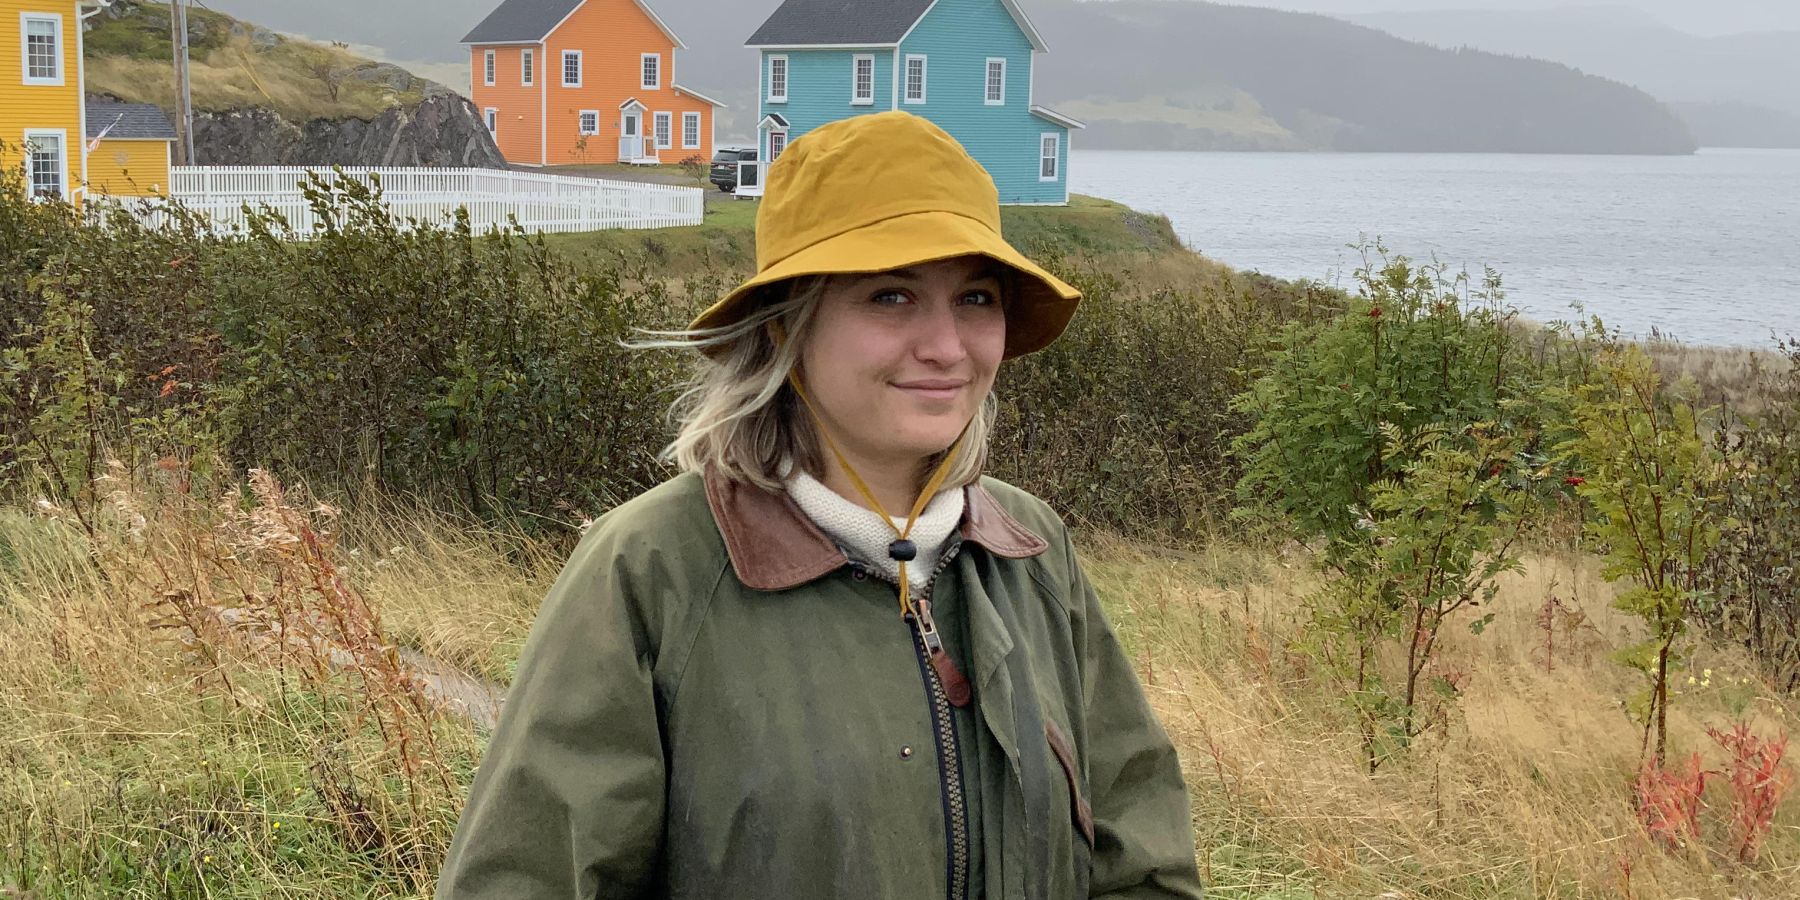 Oilskin Rain Hat, Tyvek Rain Hat, Wax Cotton Rain Hat Made in Canada by Puffin Gear- Rain Gear to keep you dry and warm. All hats have wind lanyards.  